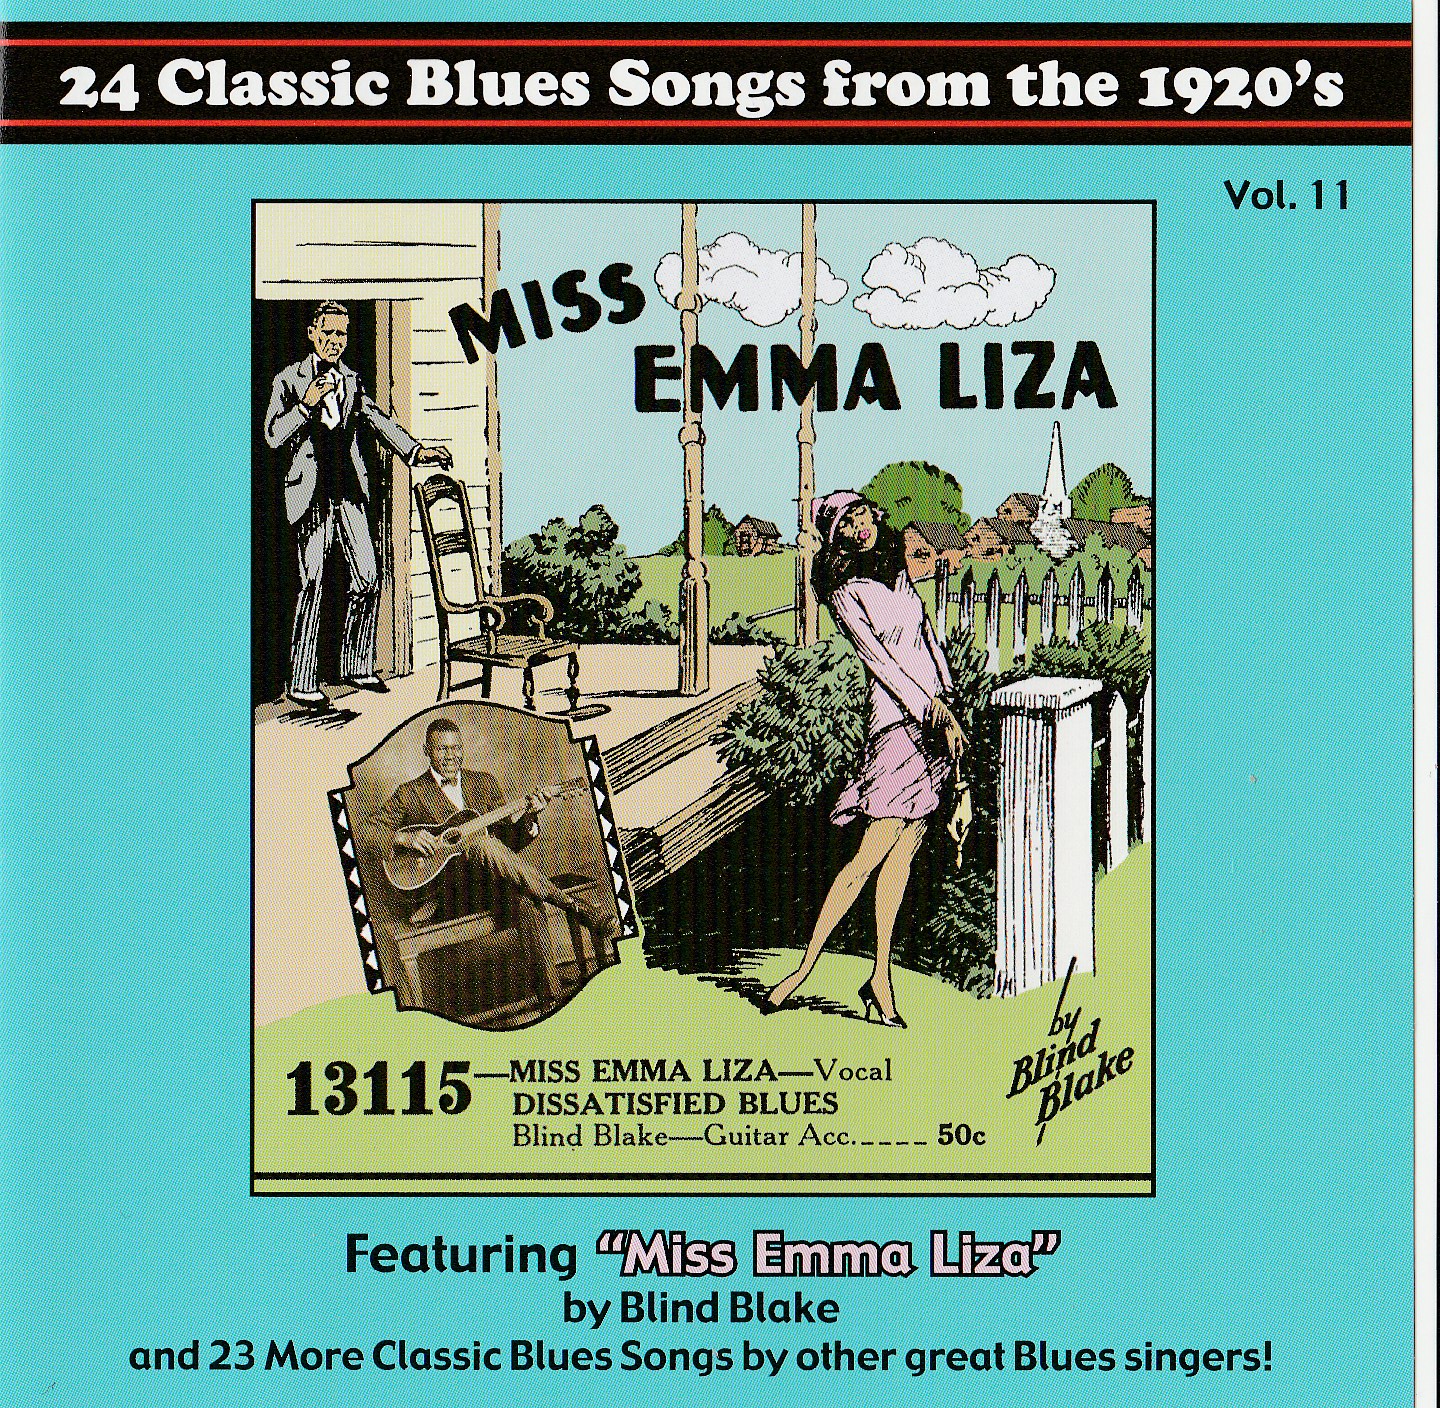 Blues Images Presents    24 Classic Blues Songs From The 1920s - Vol  11